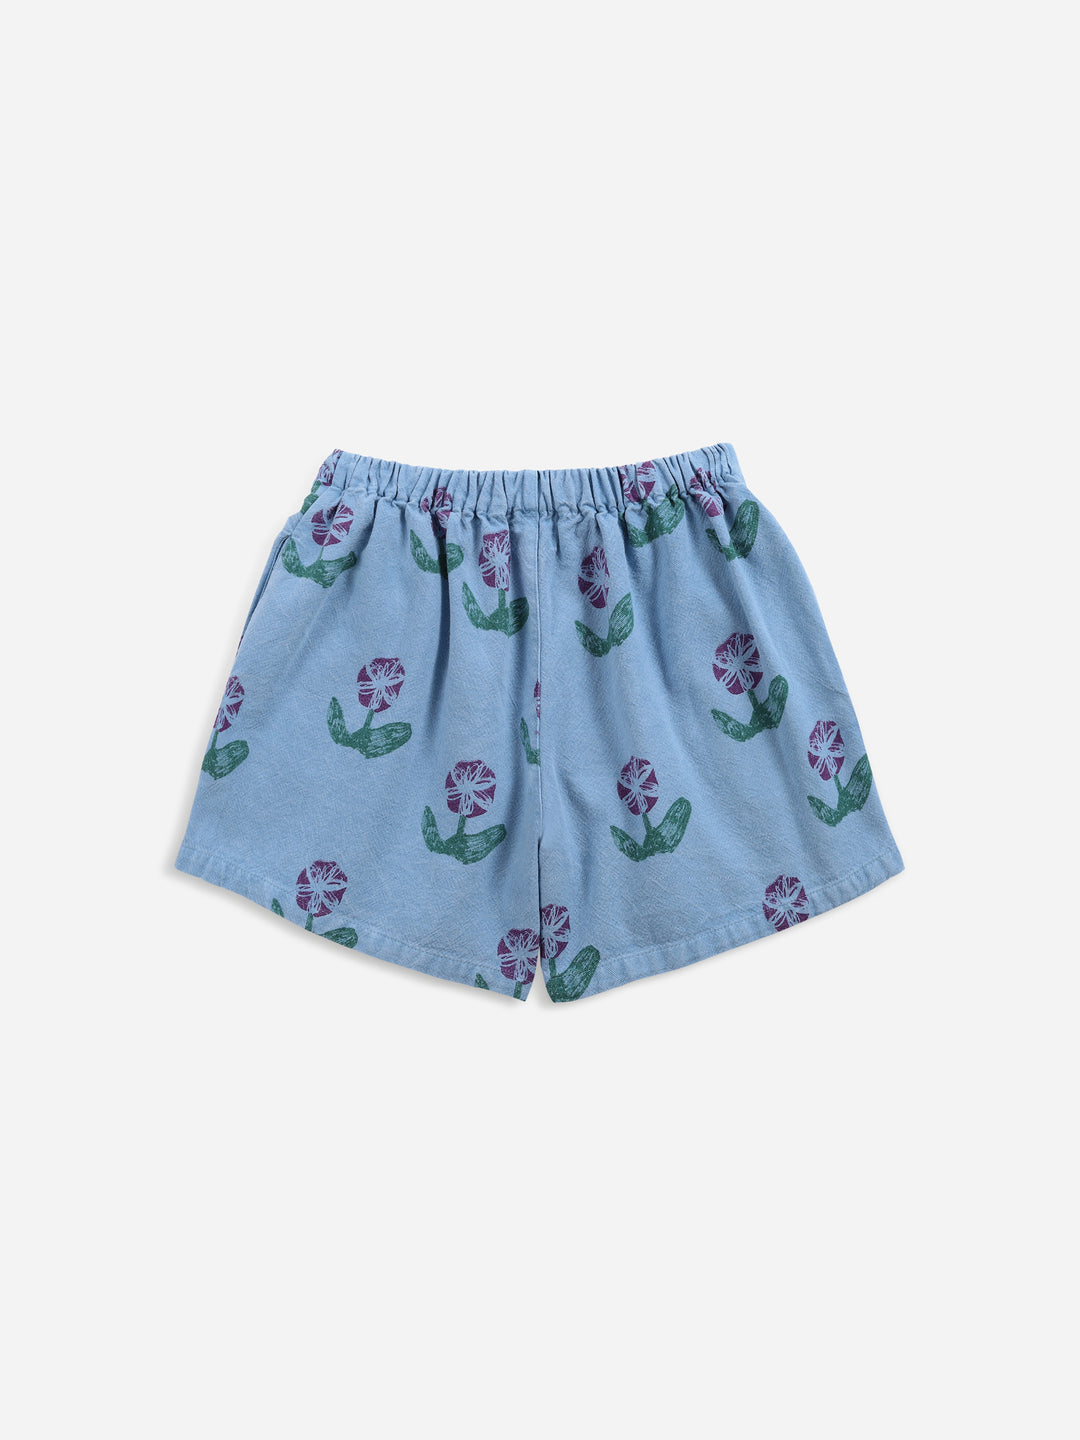 Bobo Choses blue woven culotte with purple floral print back